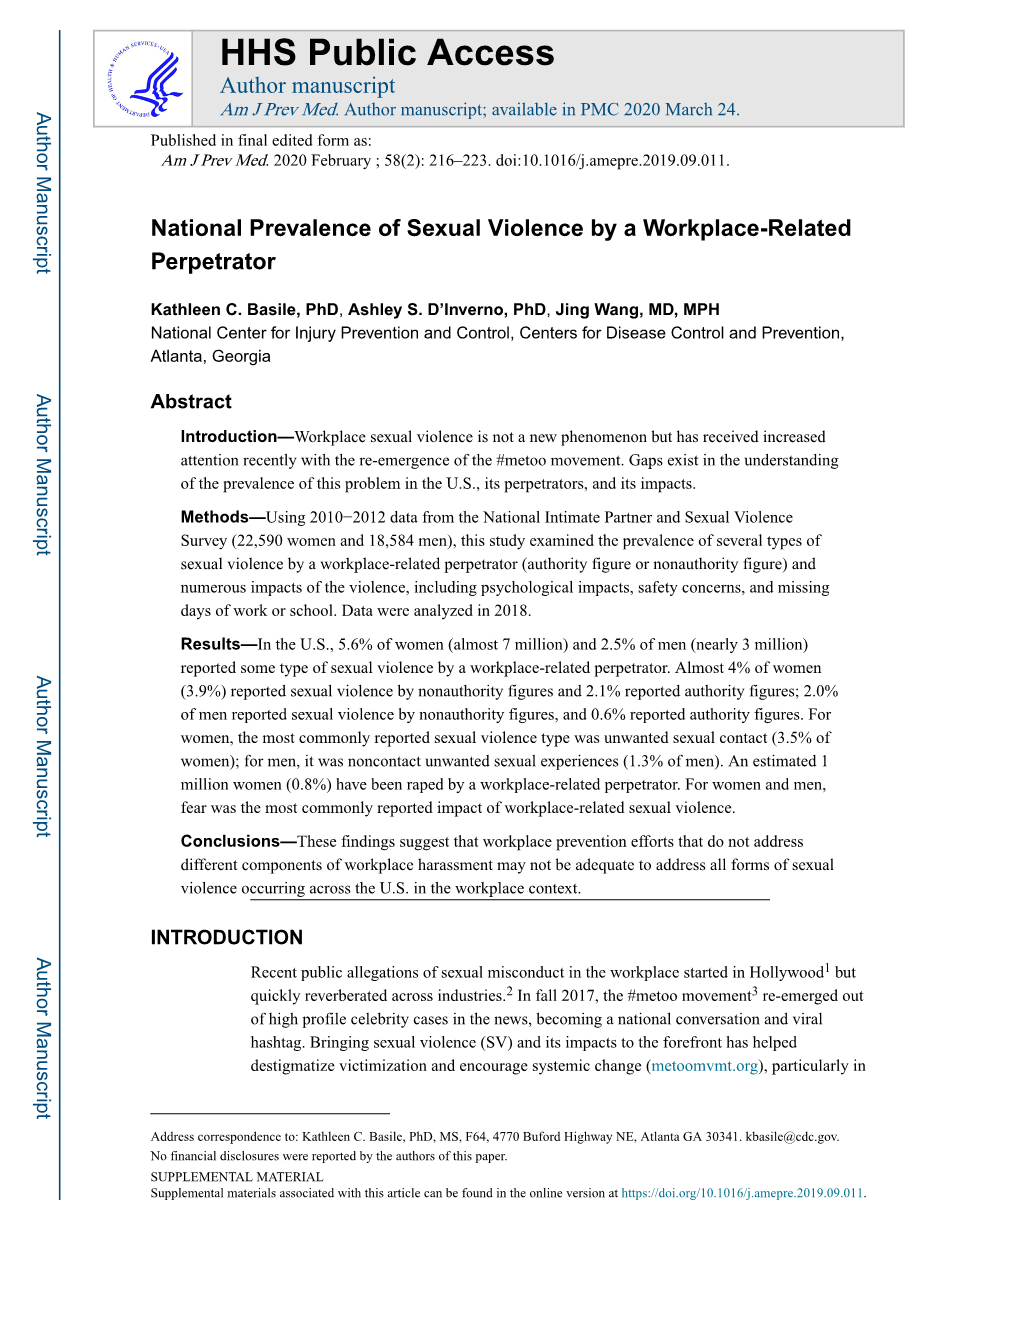 National Prevalence of Sexual Violence by a Workplace-Related Perpetrator